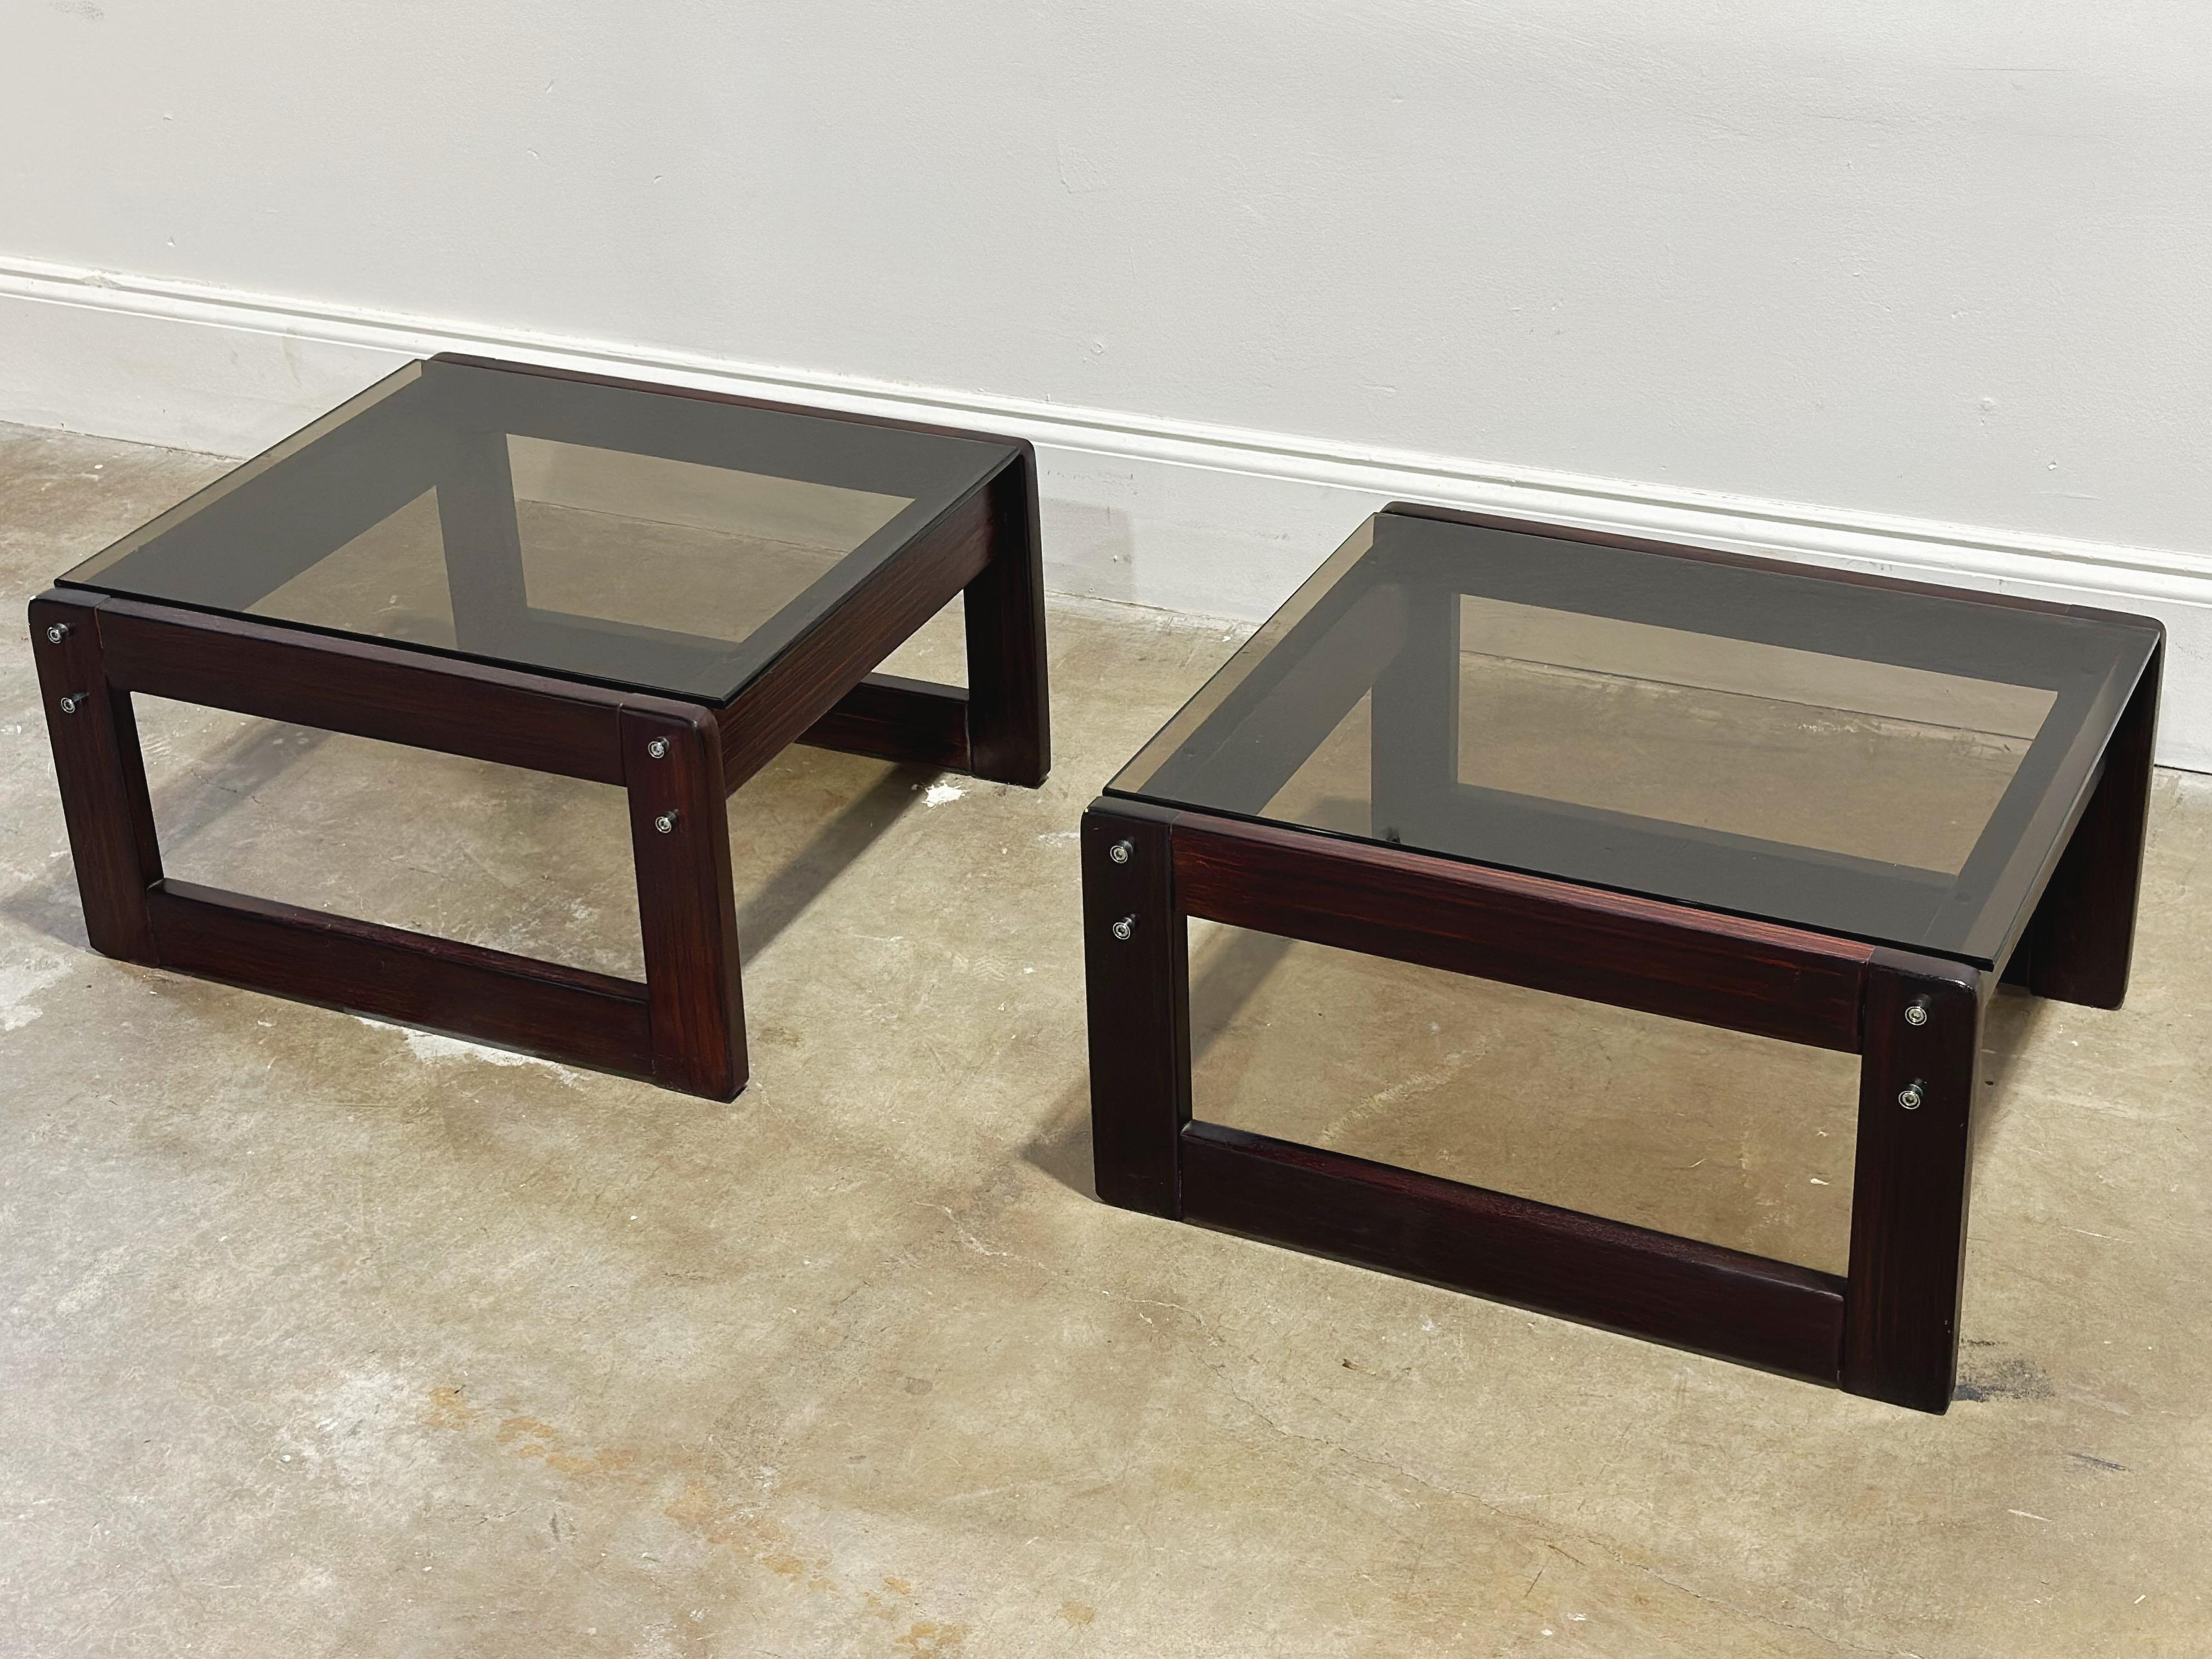 Percival Lafer Side Tables, Midcentury Brazilian Modern Rosewood + Smoked Glass 1